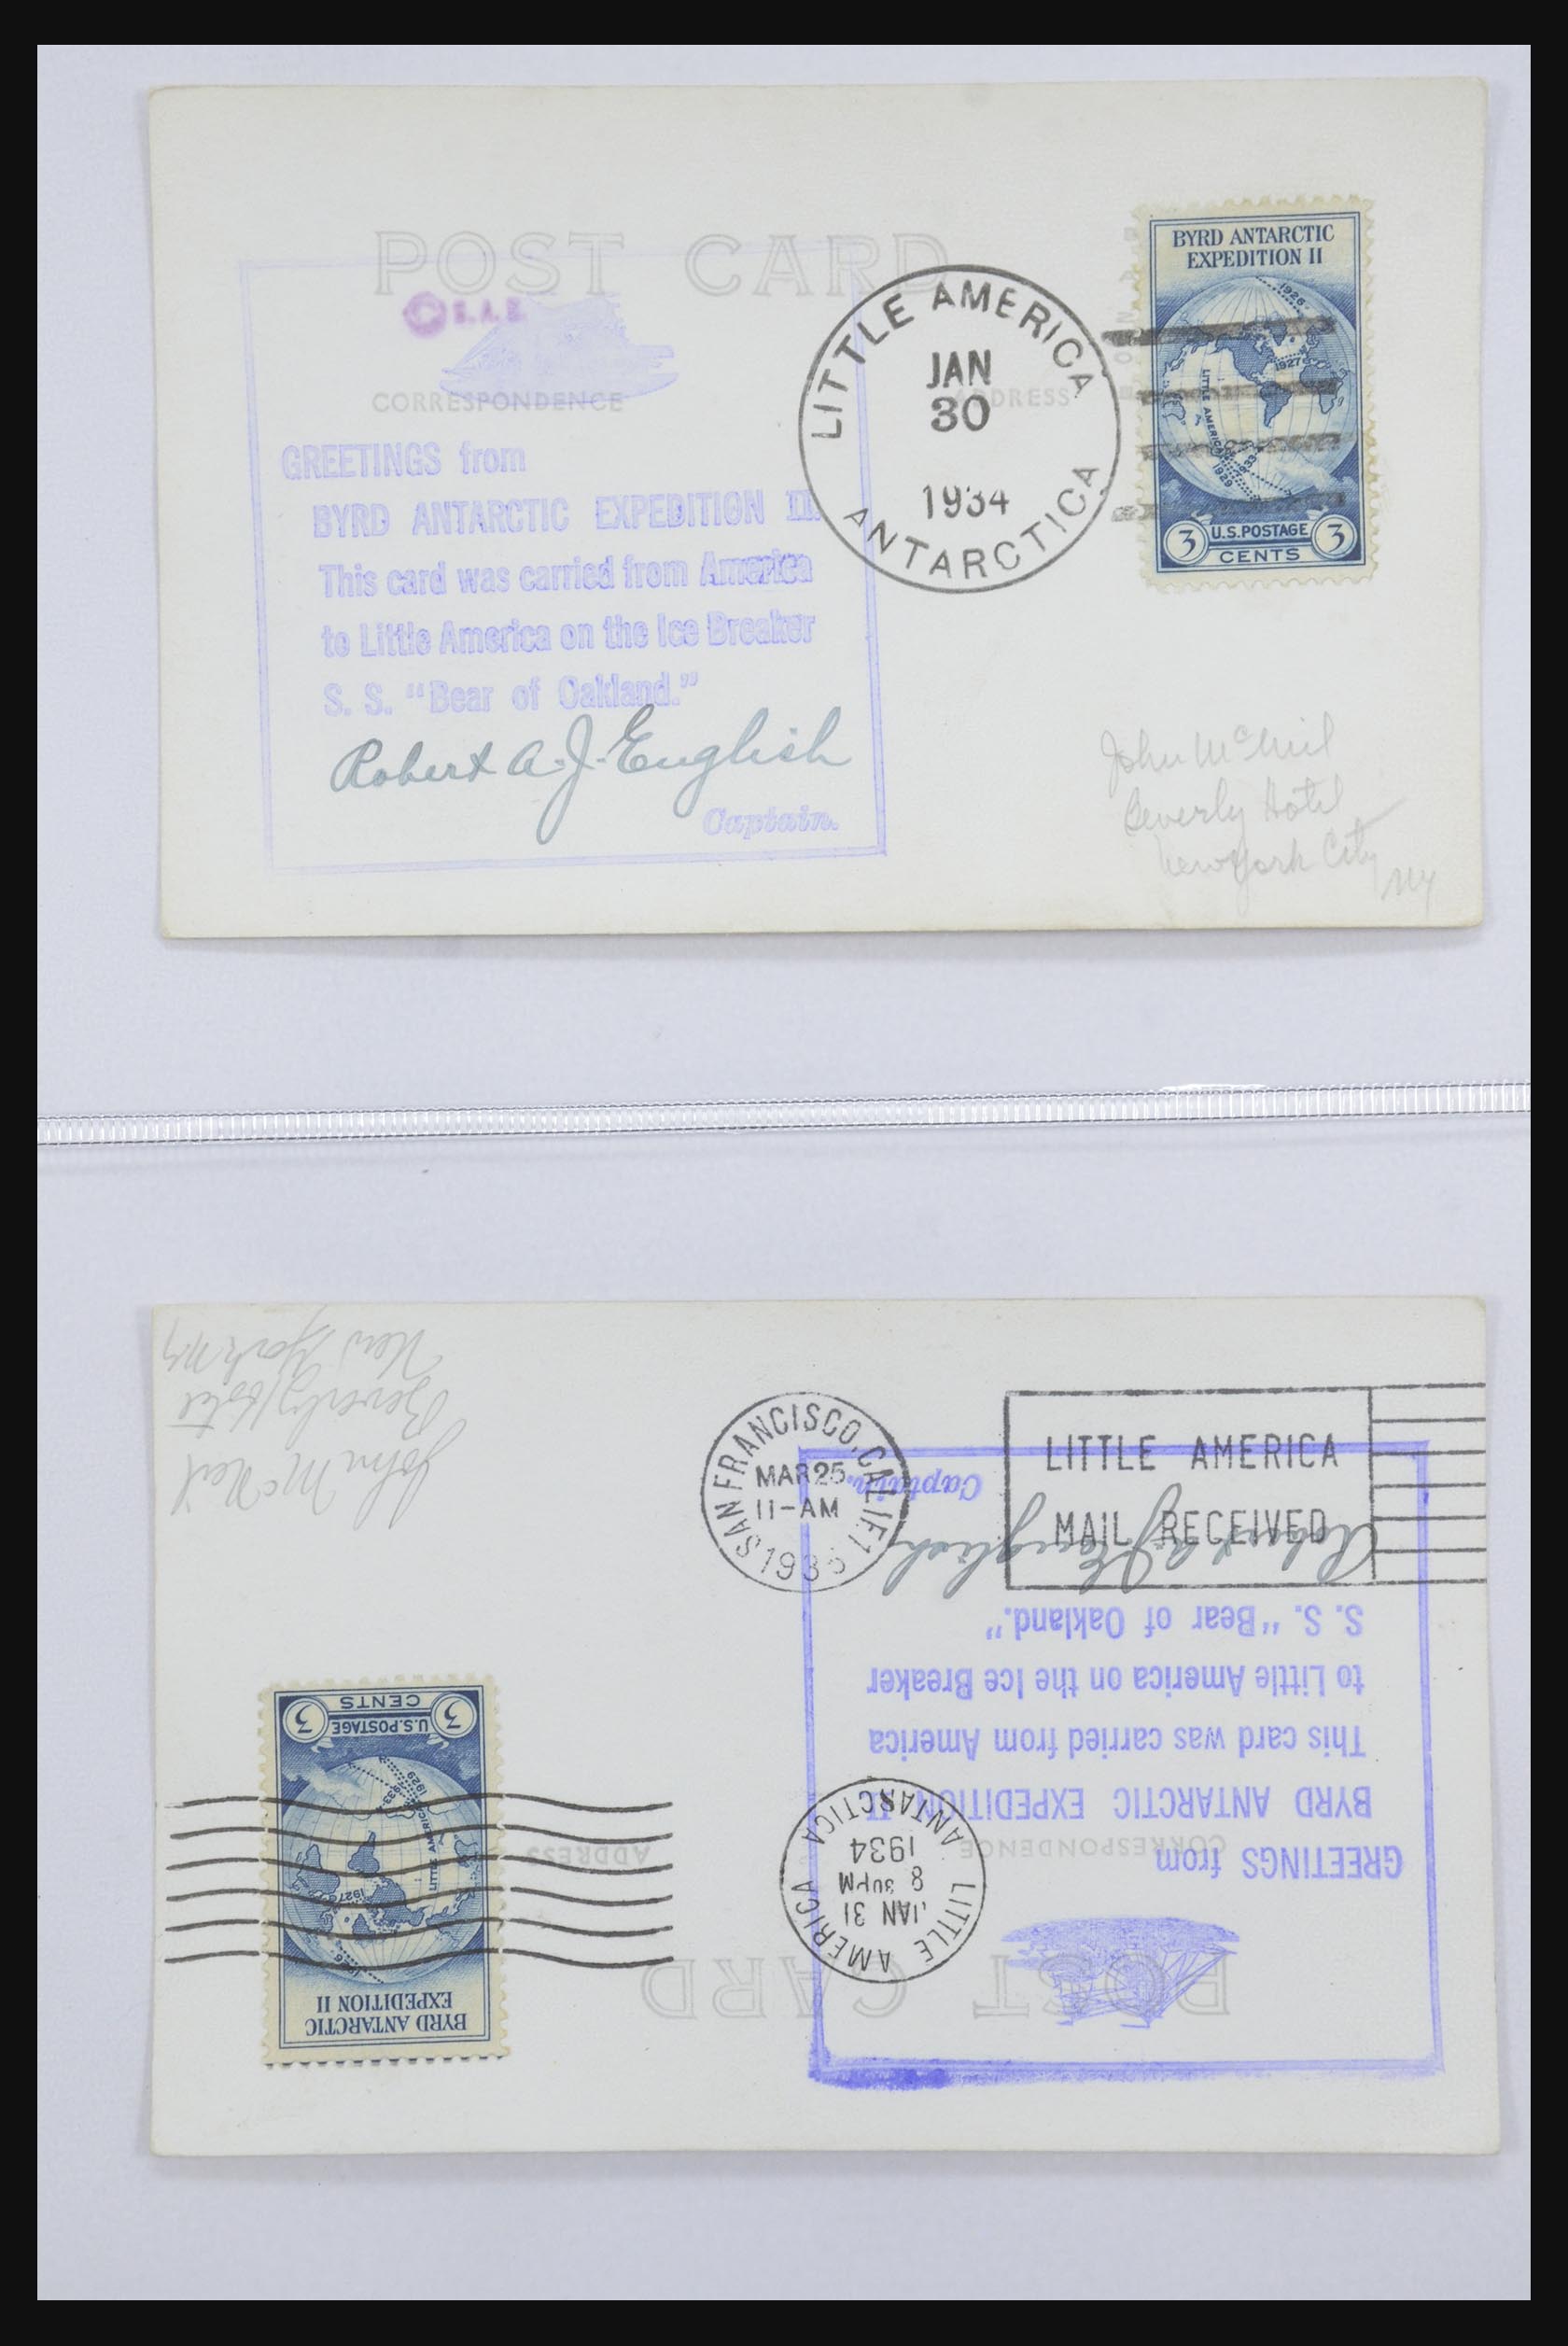 31627 022 - 31627 Byrd Antarctic Expedition 1934.